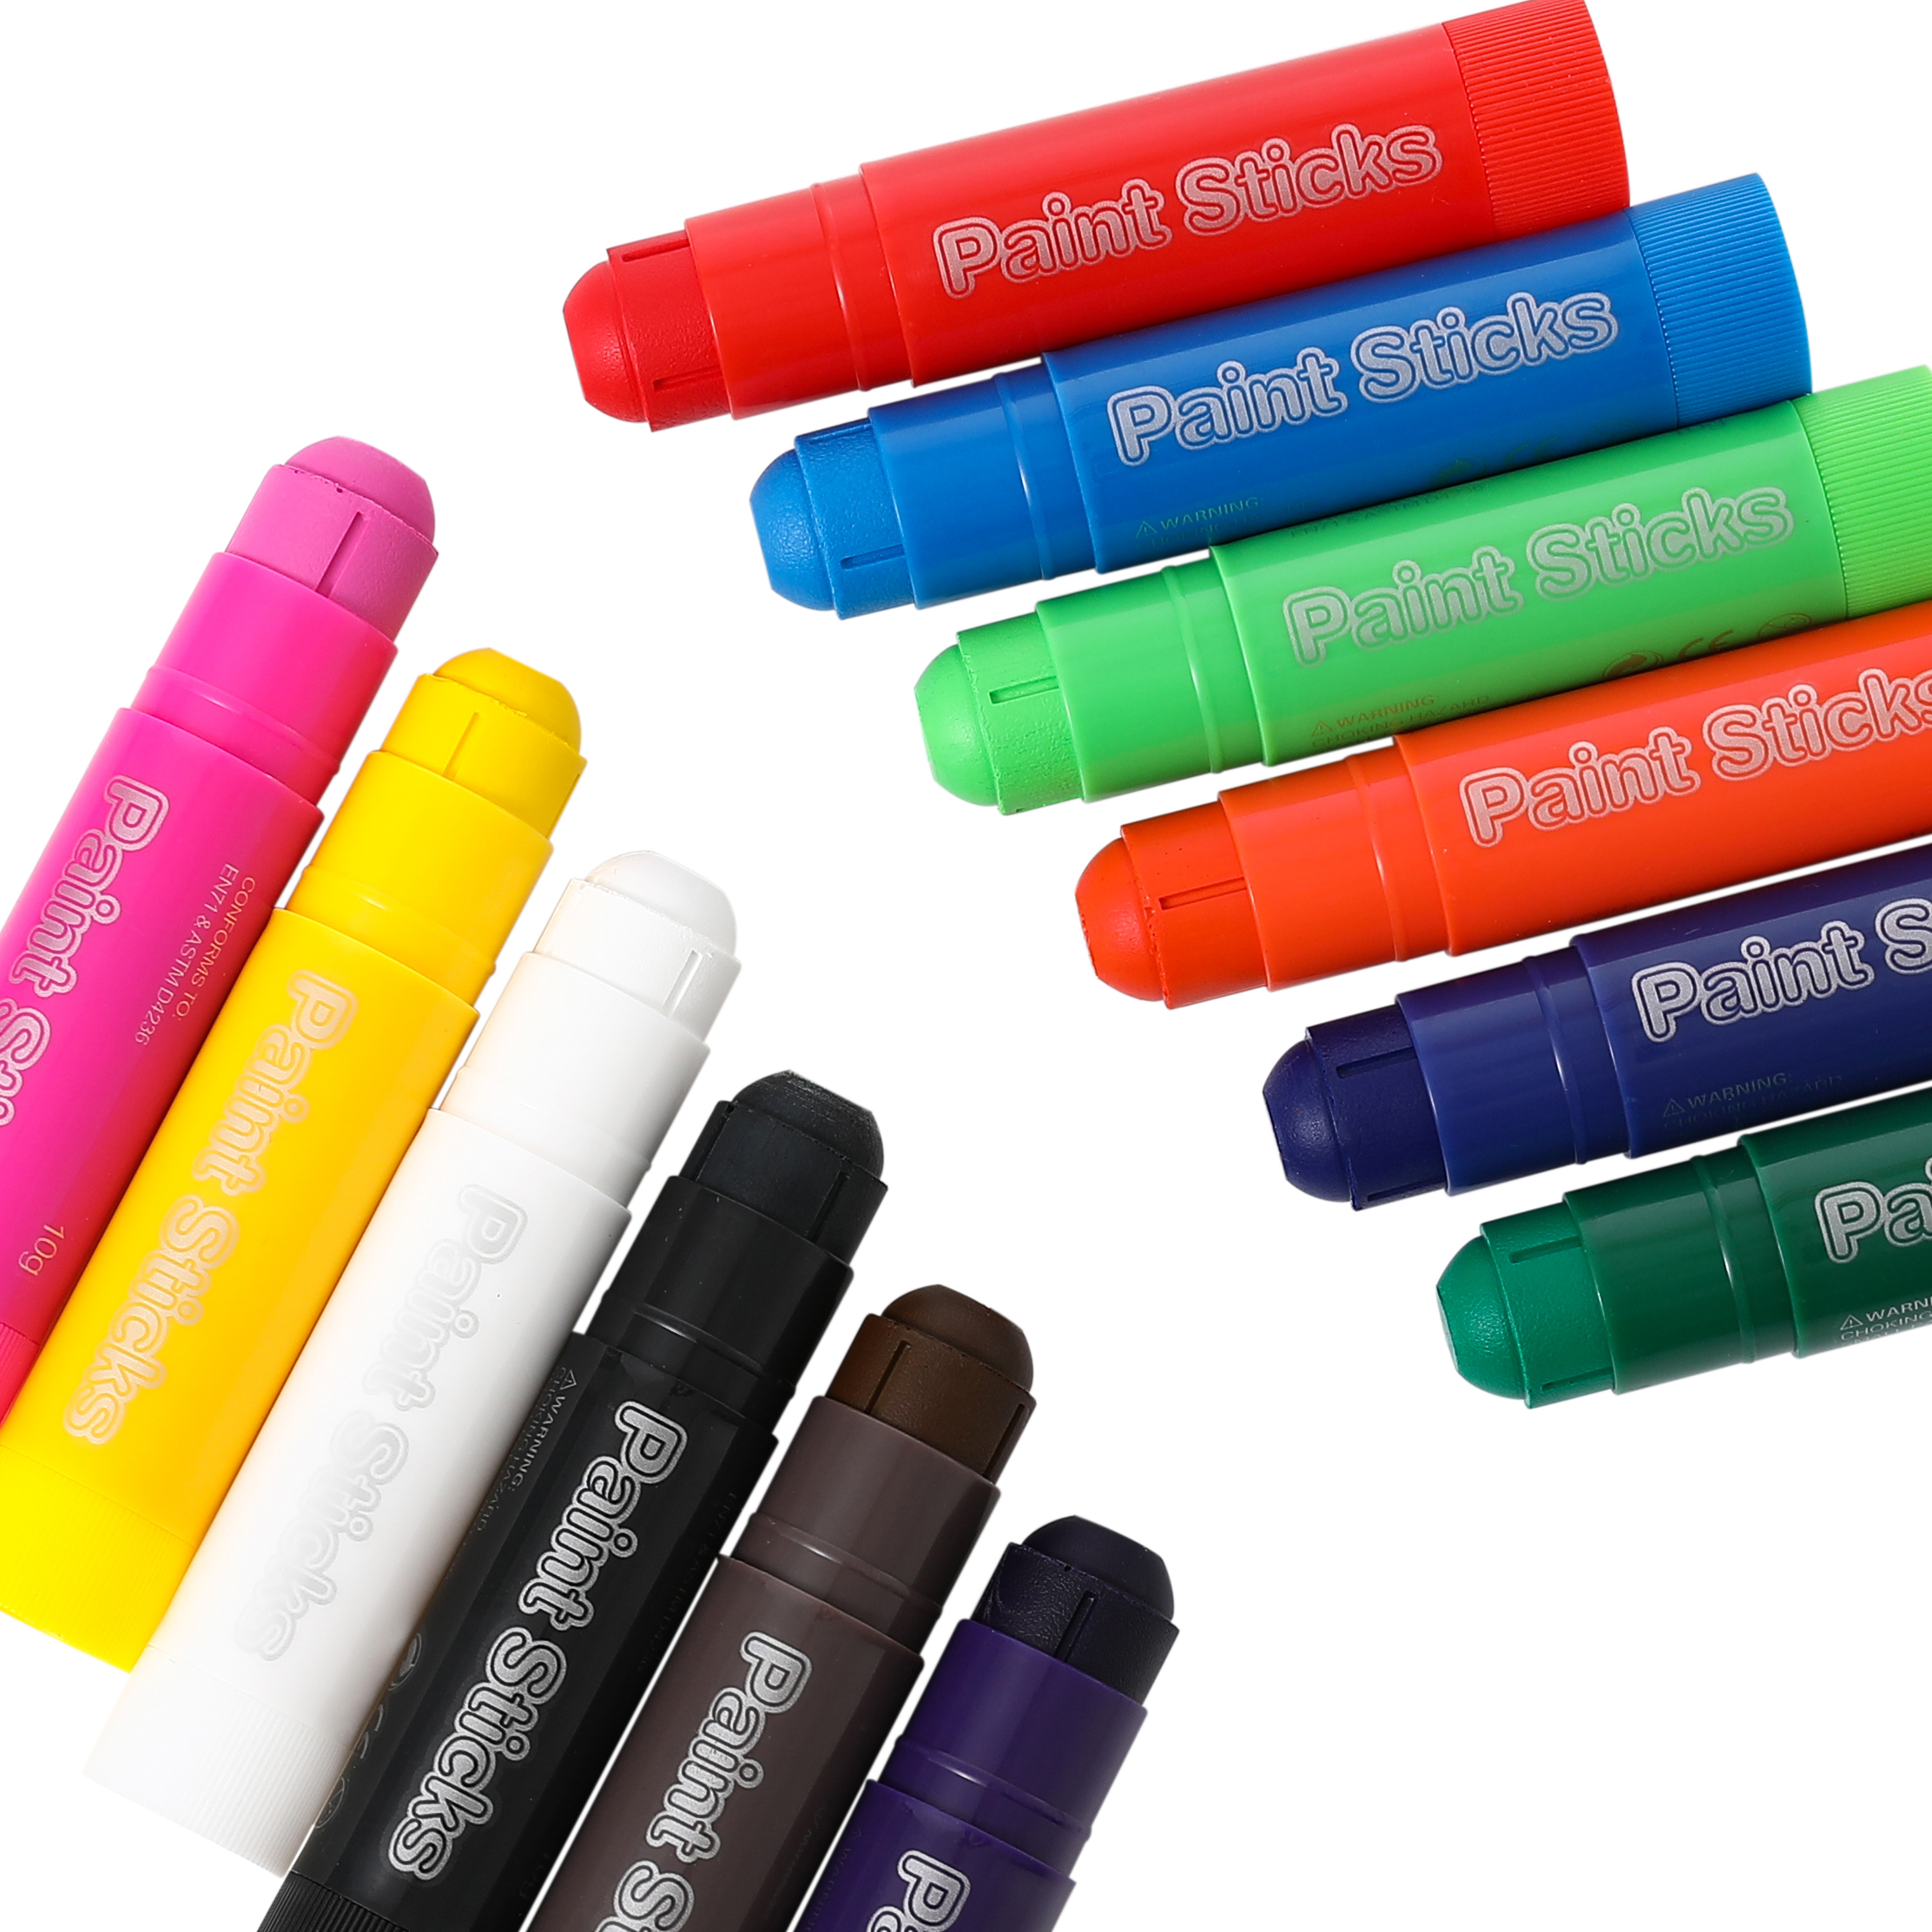 Tempera Paint Sticks, 12 Colors Solid Tempera Paint, Super Quick Drying,  Works Great On Paper Wood Glass Ceramic Canvas